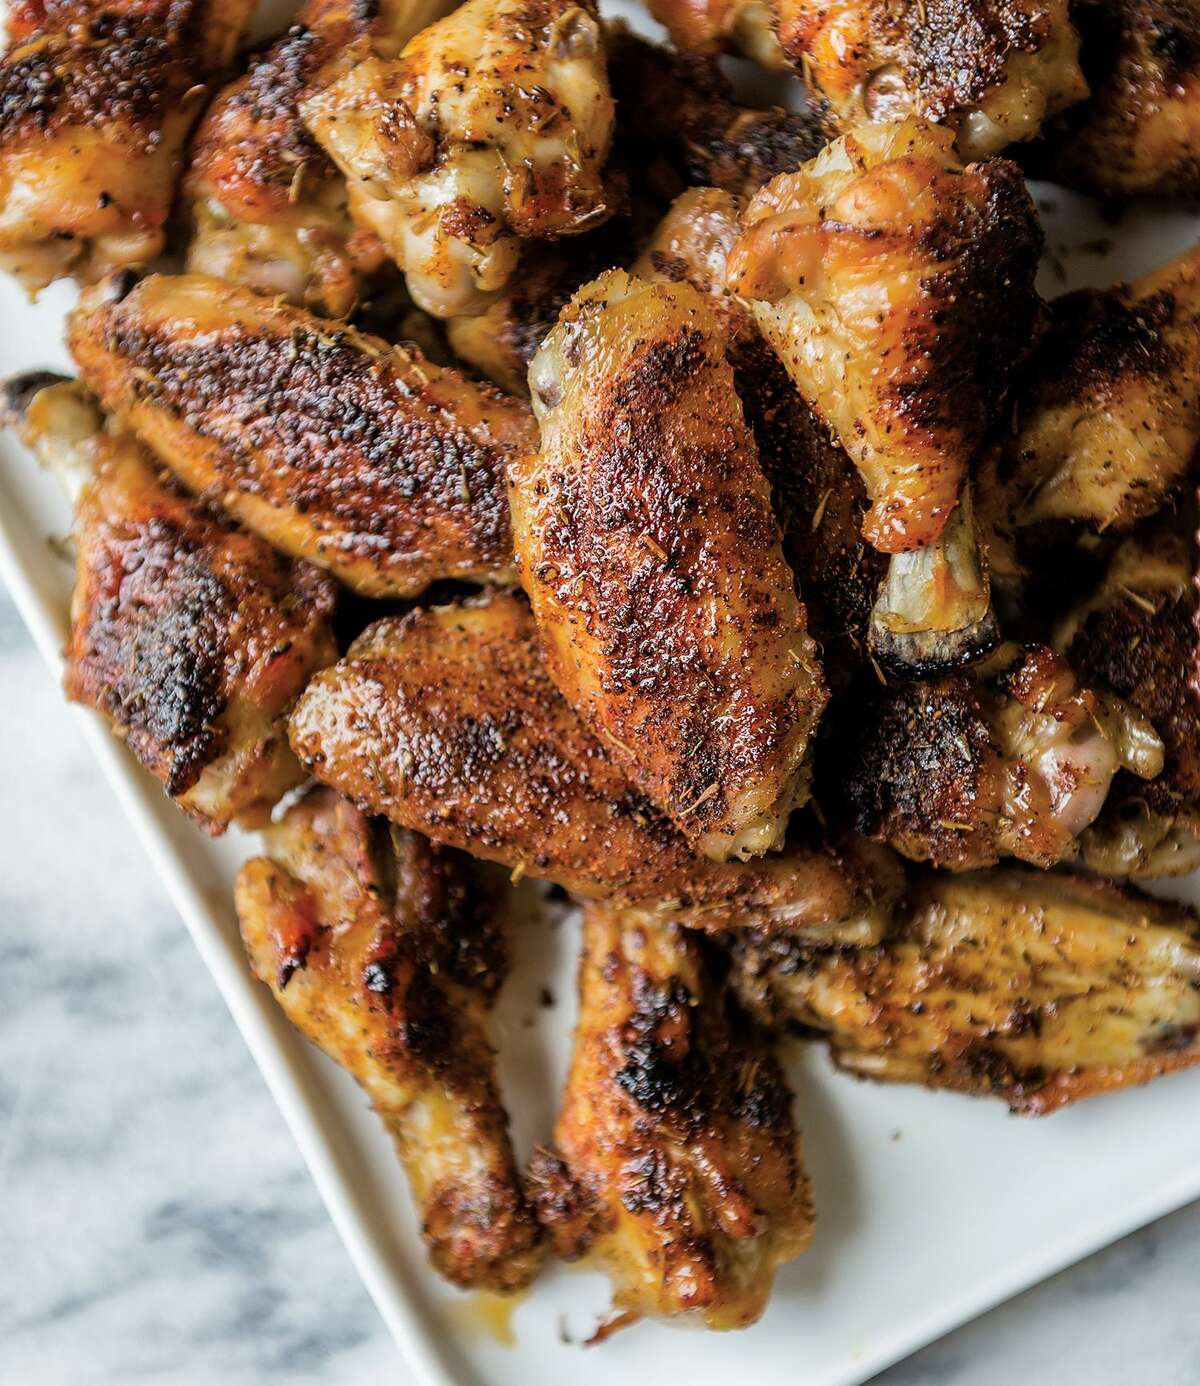 The Best Oven-Baked Chicken Wings! from ?“100 Days of Real Food: On a Budget?” by Lisa Leake (William Morrow).